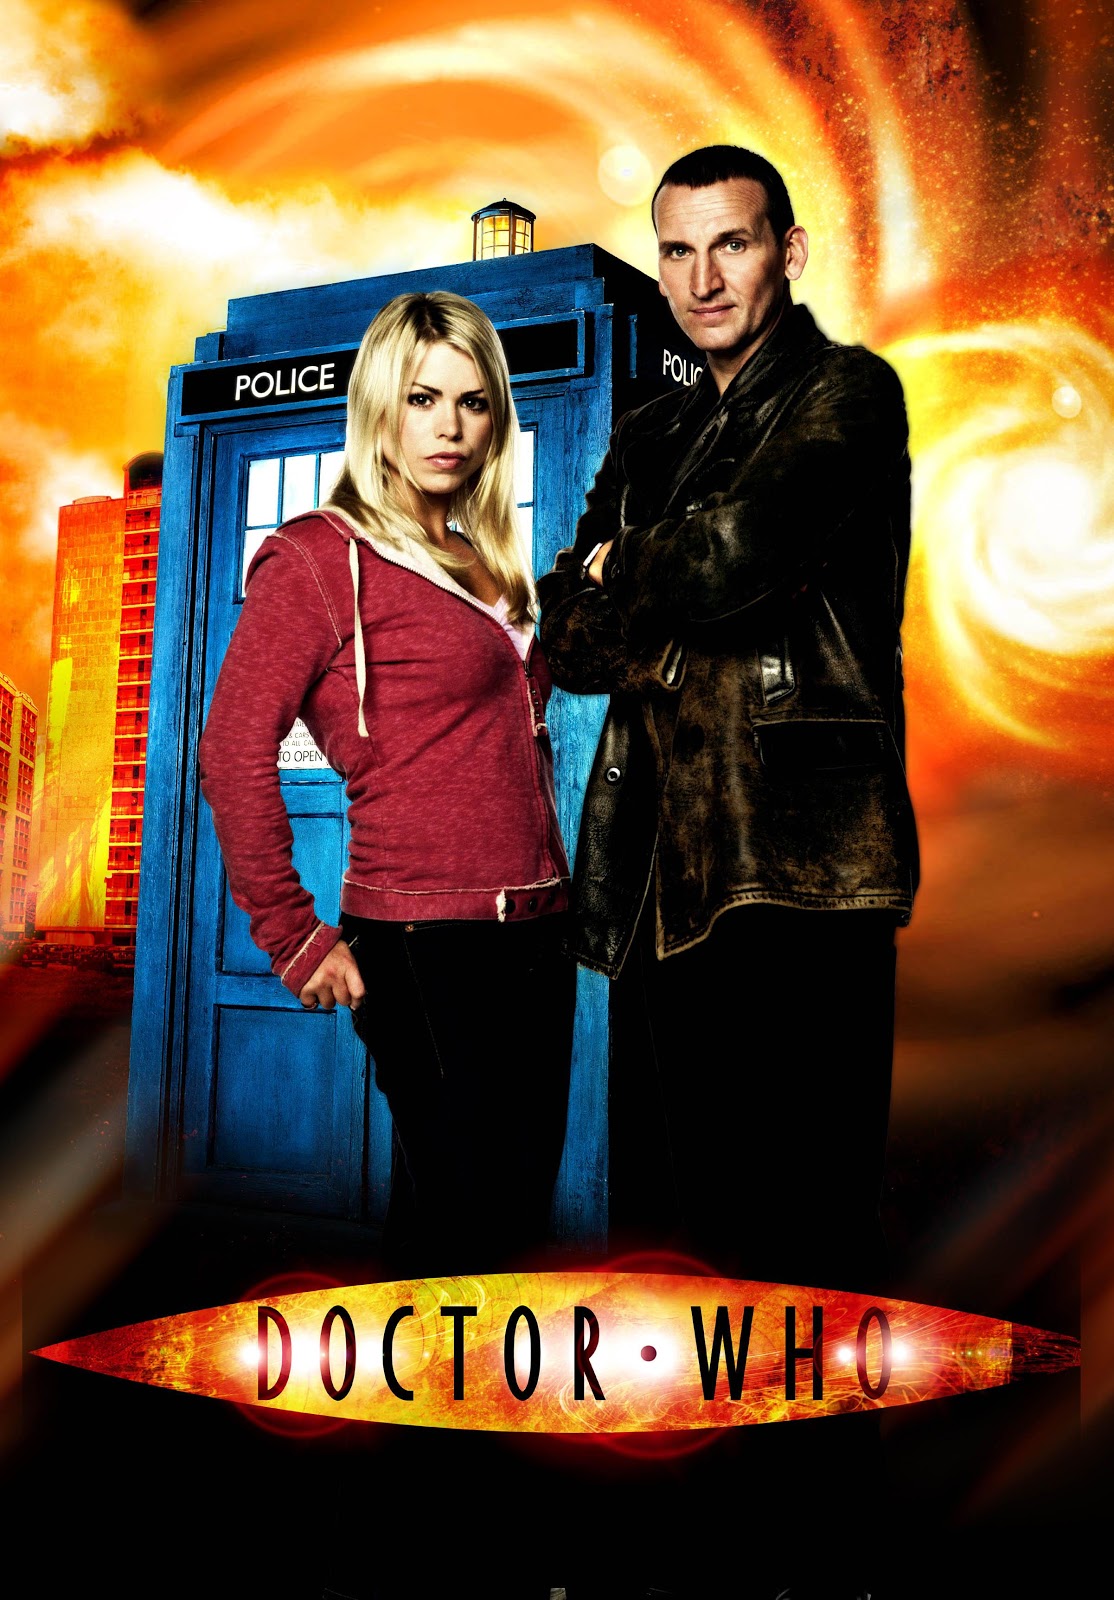 Doctor Who Posters | Tv Series Posters and Cast1114 x 1600